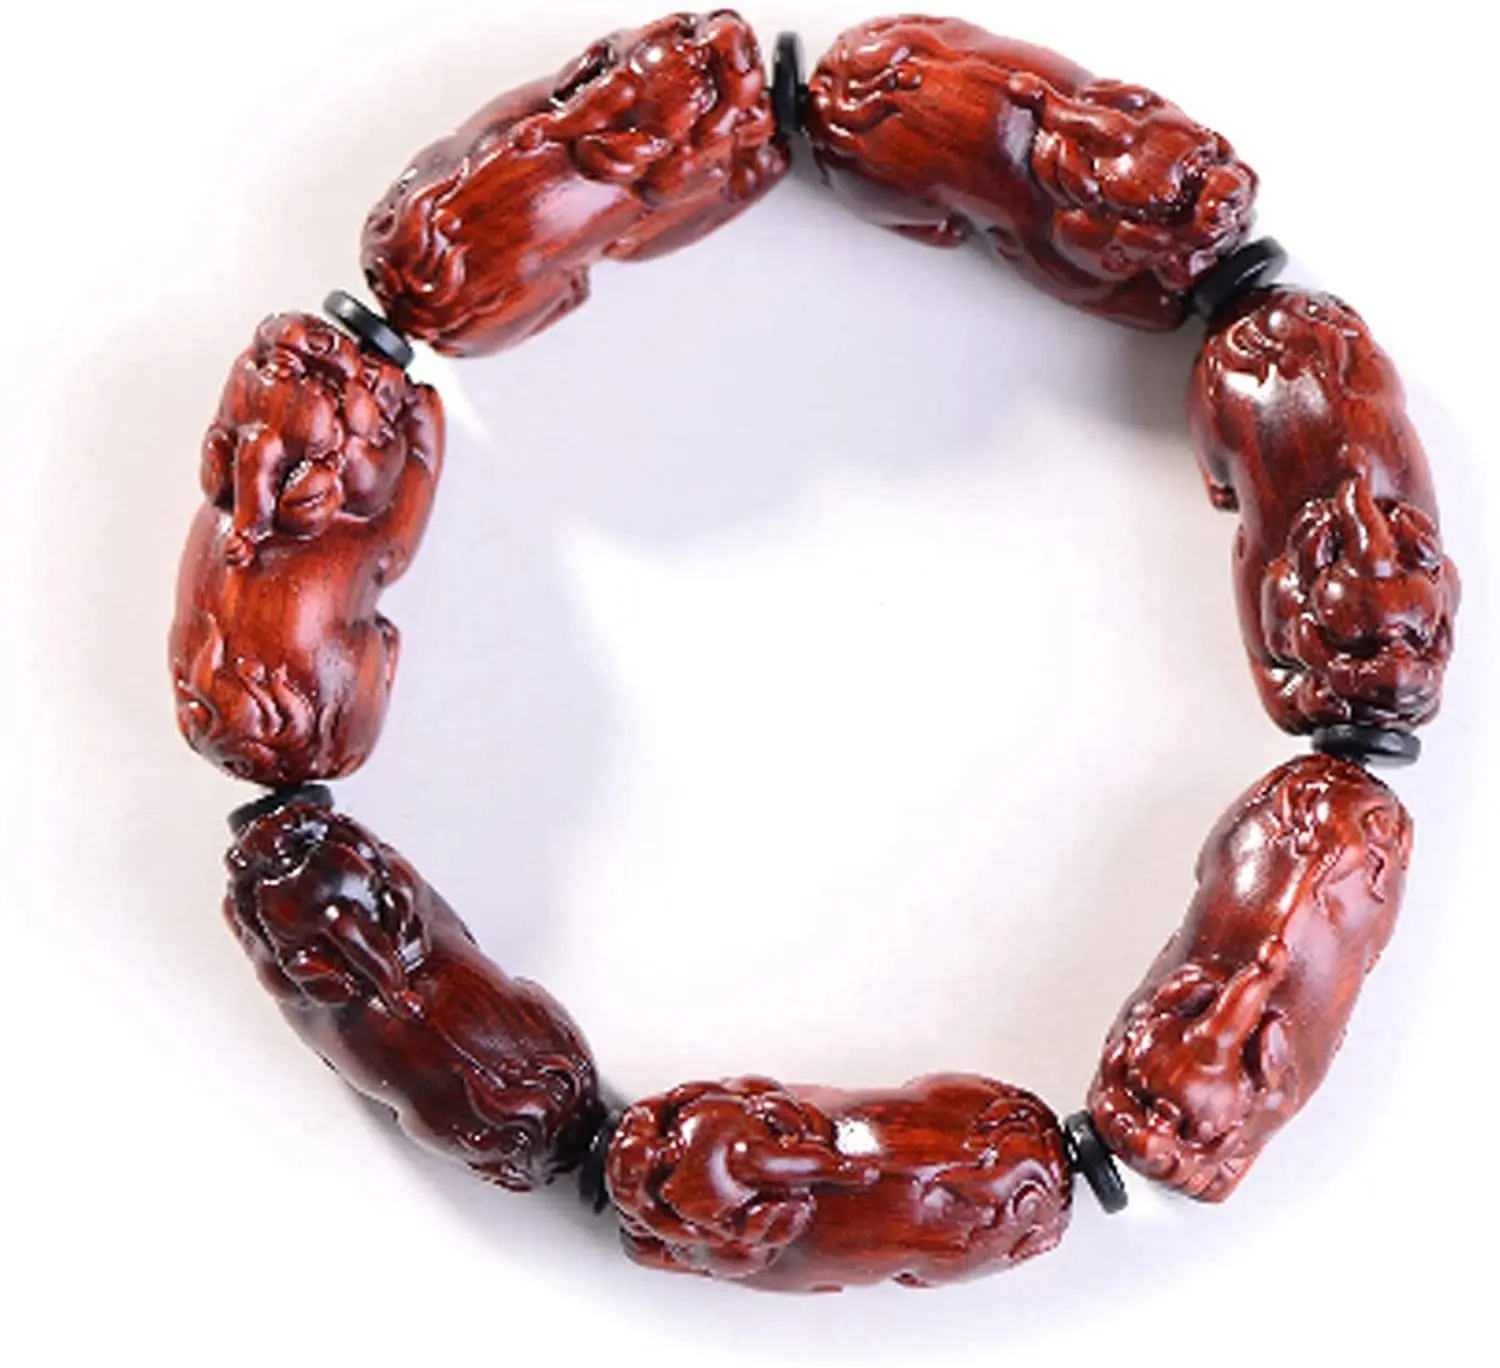 

Red Sandalwood Bracelets Fengshui Prosperity Bracelet Wood Beads Bracelet Pi Xiu/Pi Yao Attract Wealth And Good Luck Protection